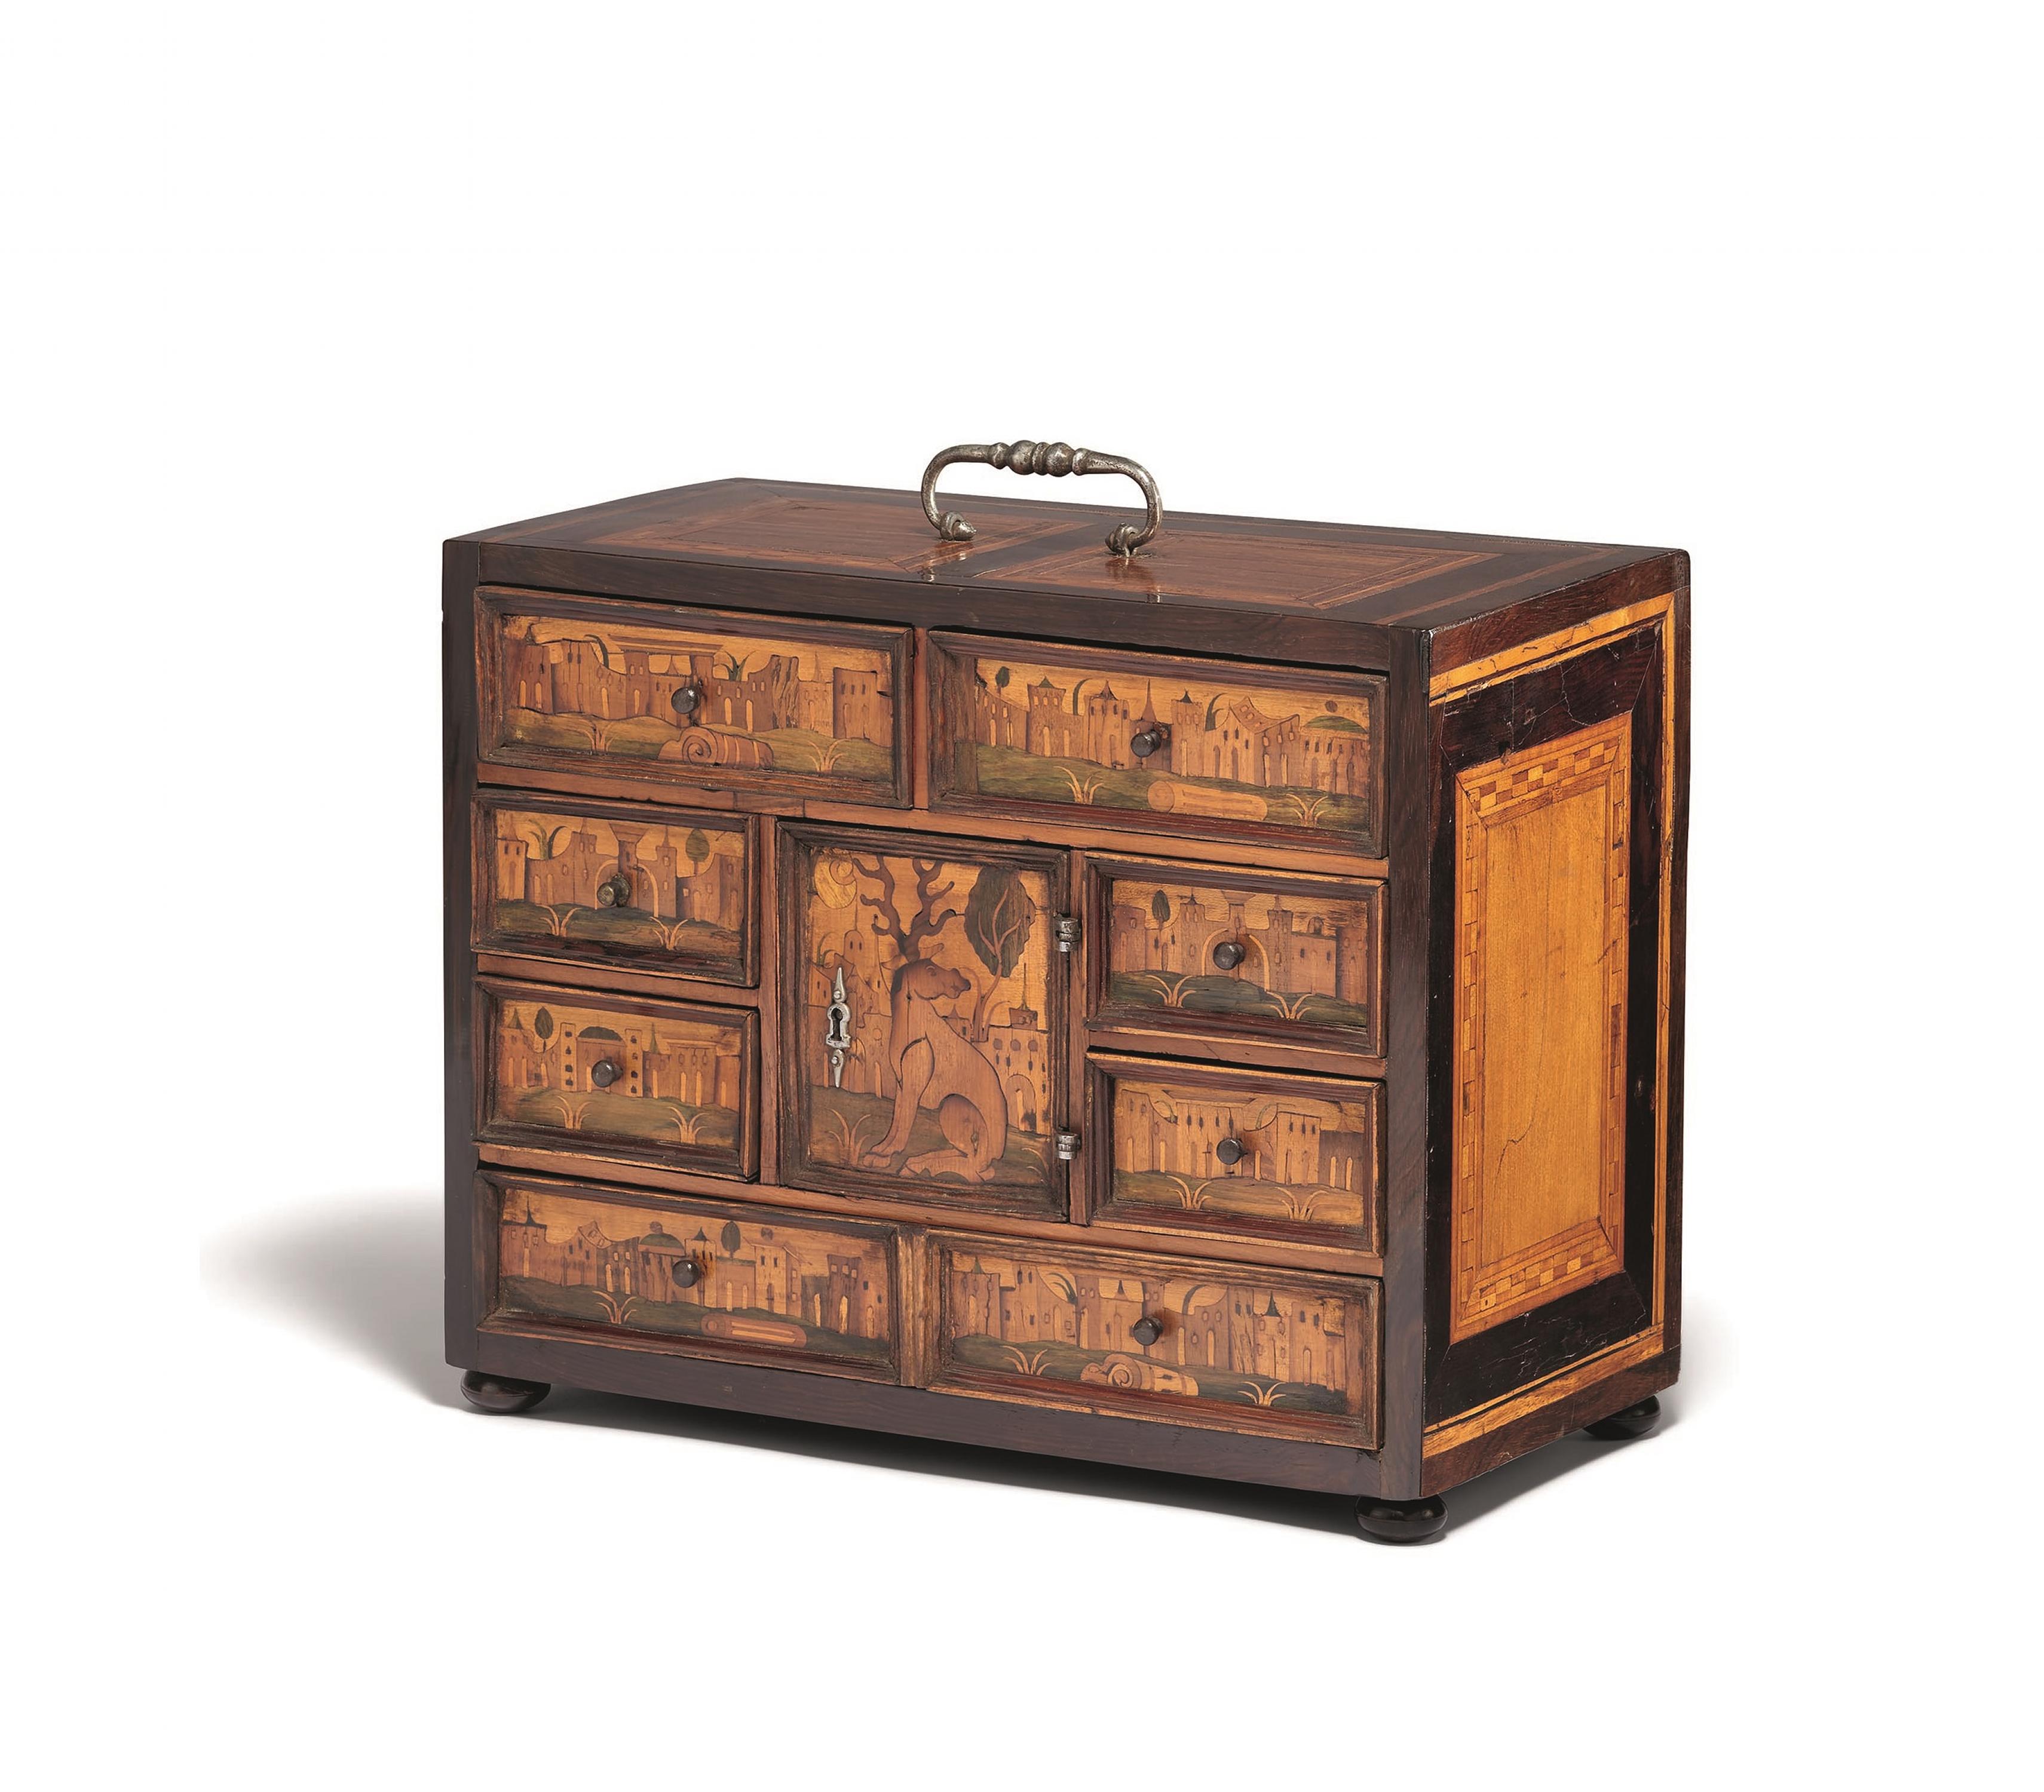 NICE WOODEN CABINET BOX WITH CITY SILHOUETTES AND DEER